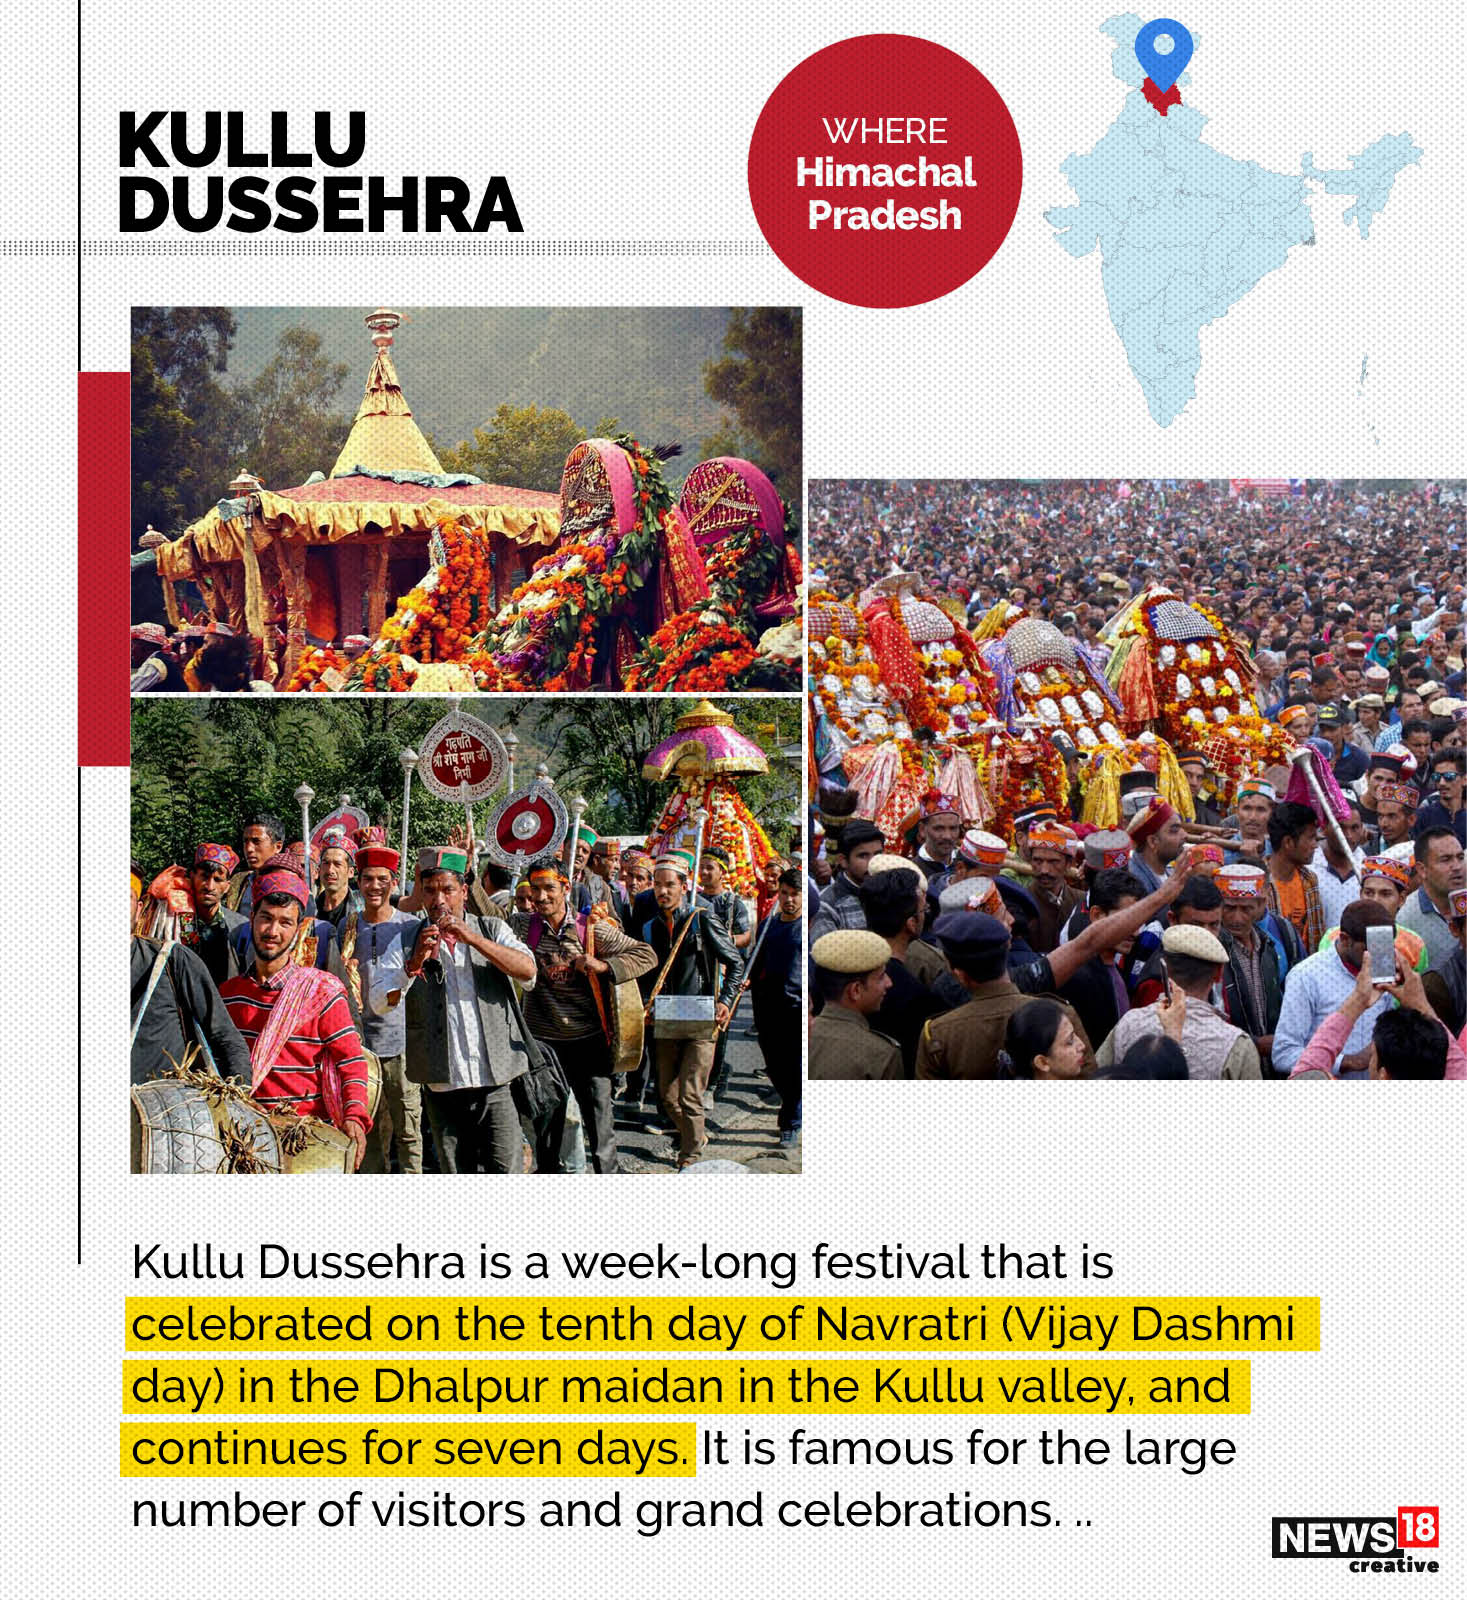 Kullu Dussehra is a week-long festival that is celebrated on the tenth day of Navratri. (Image: news18 Creative)